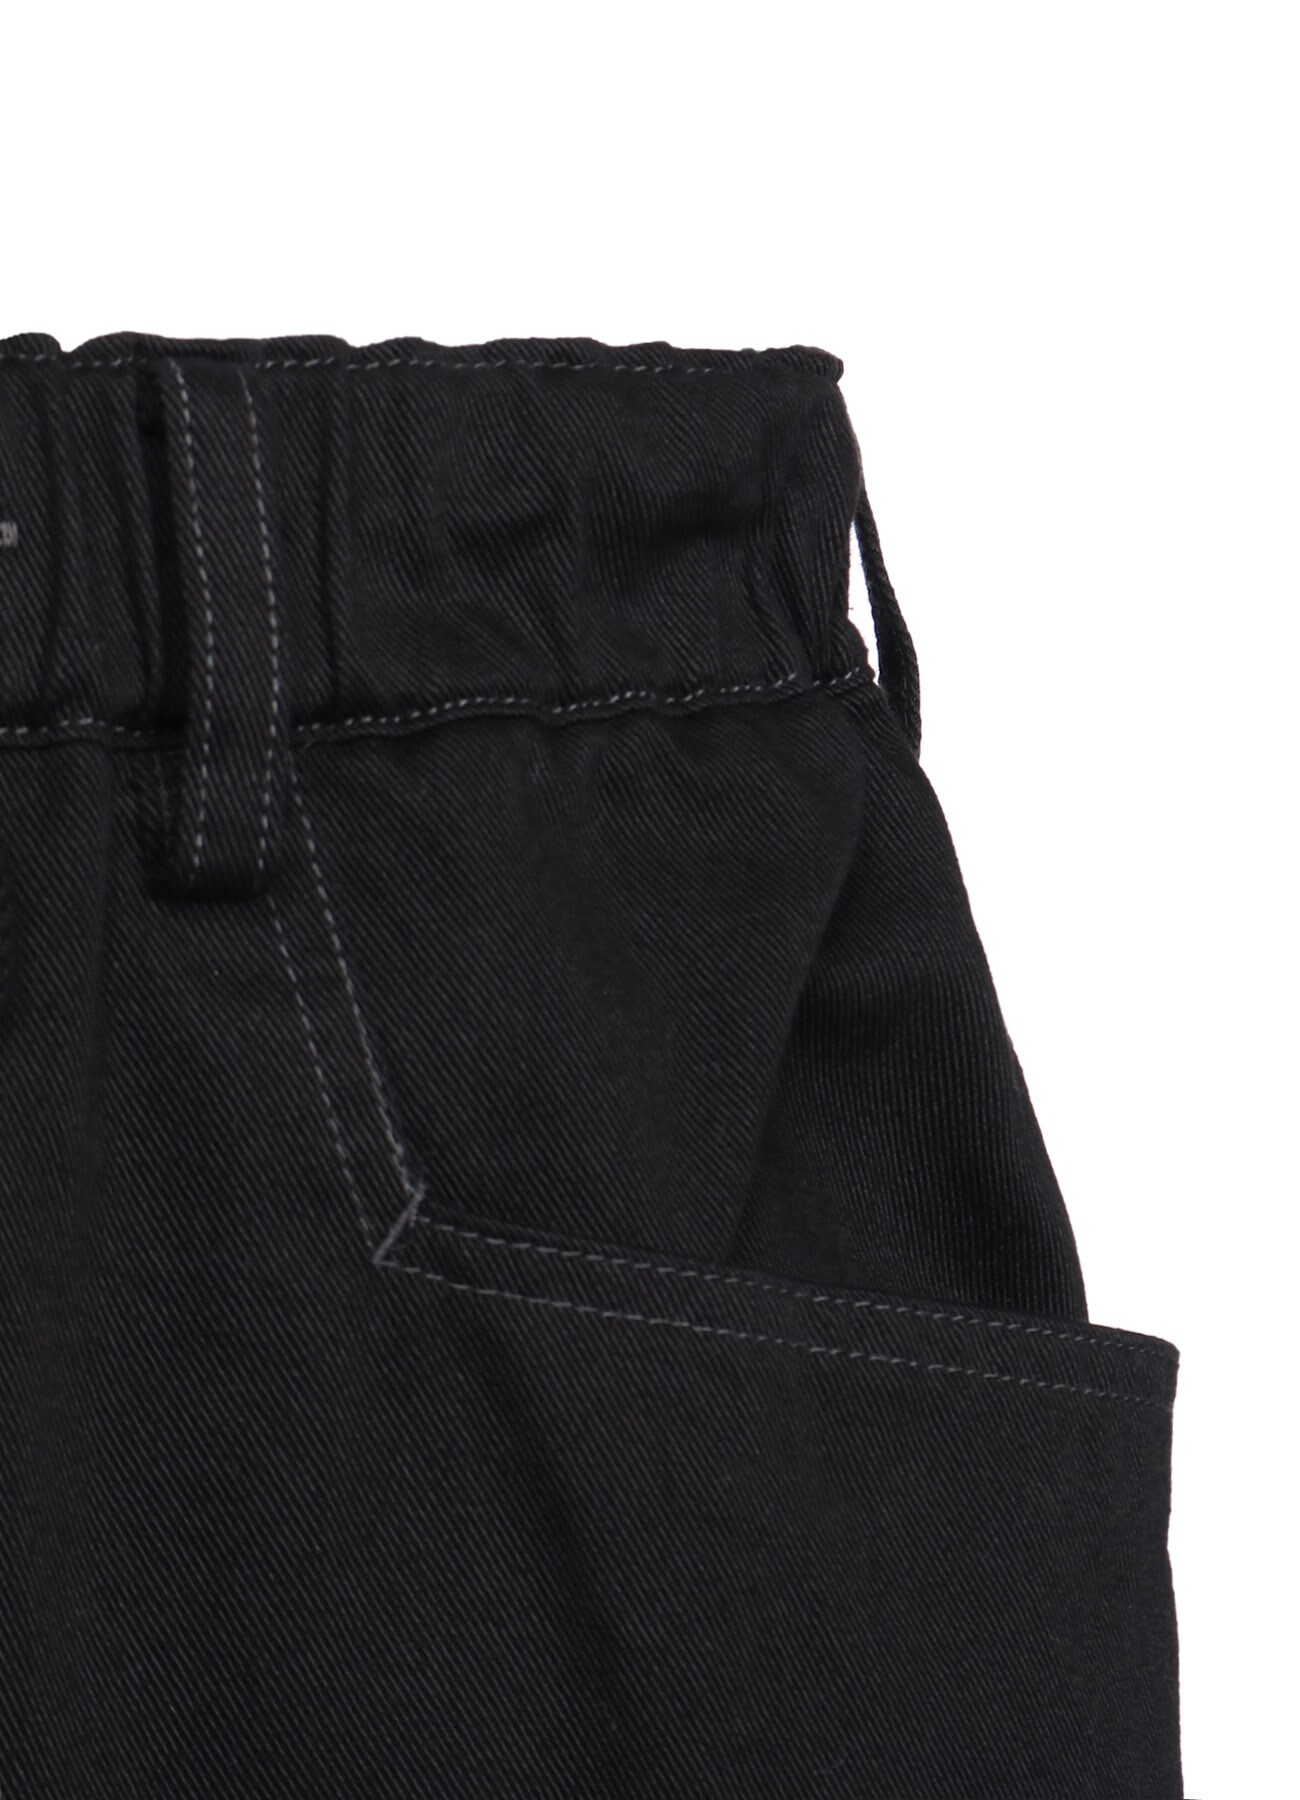 COTTON DRILL CARGO PANTS WITH BELTED HEMS